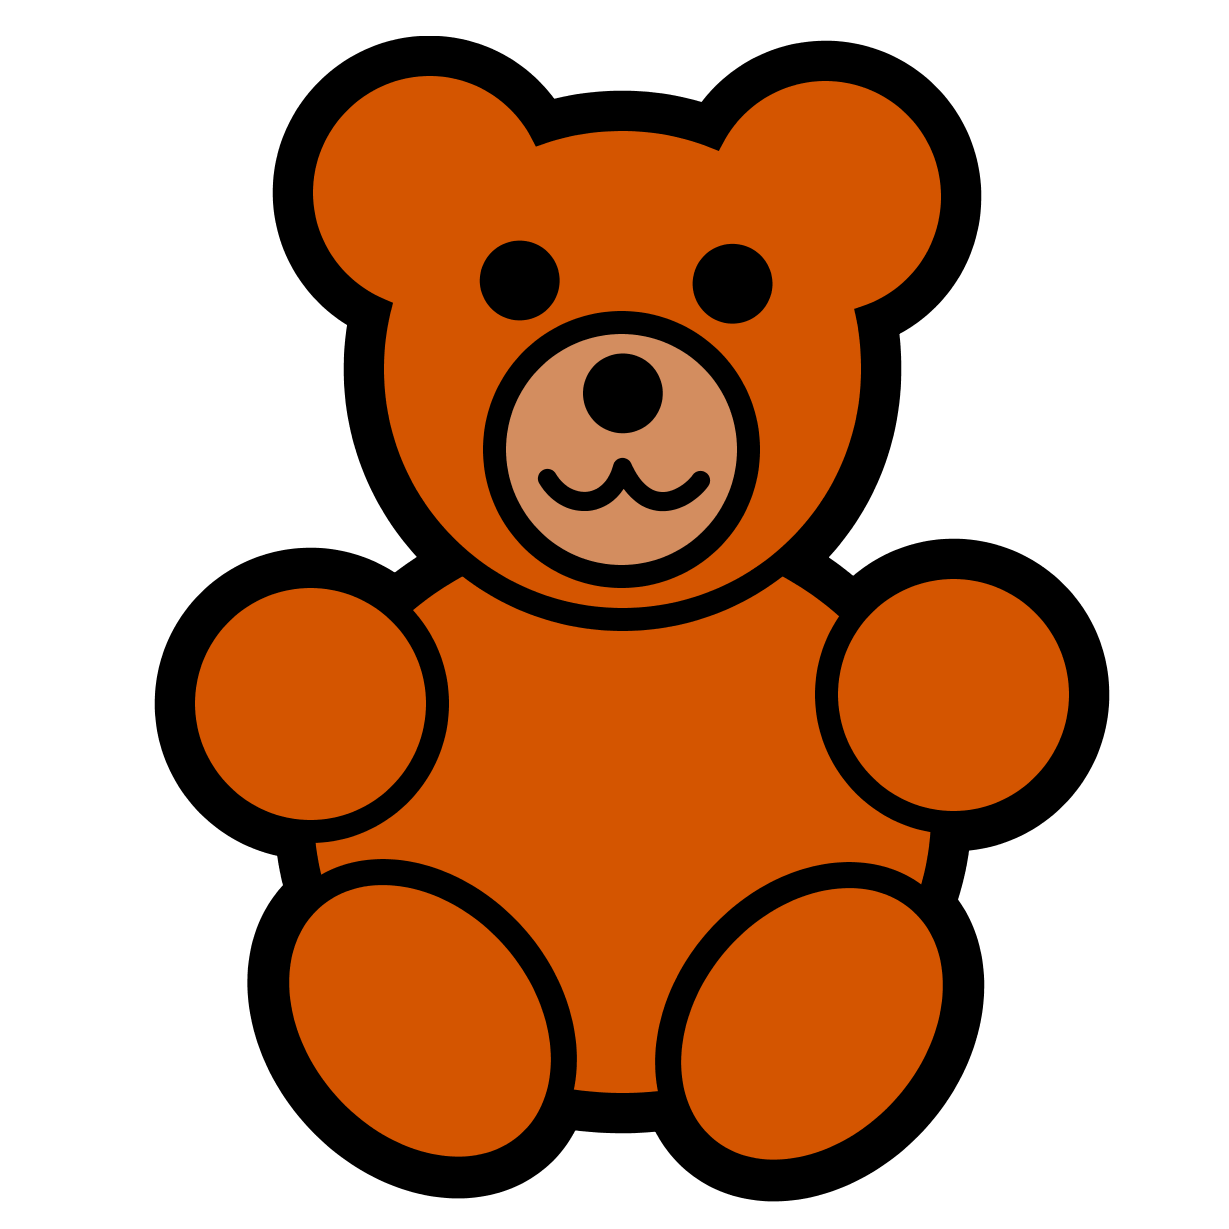 Teddy bear clipart free clipart images 5